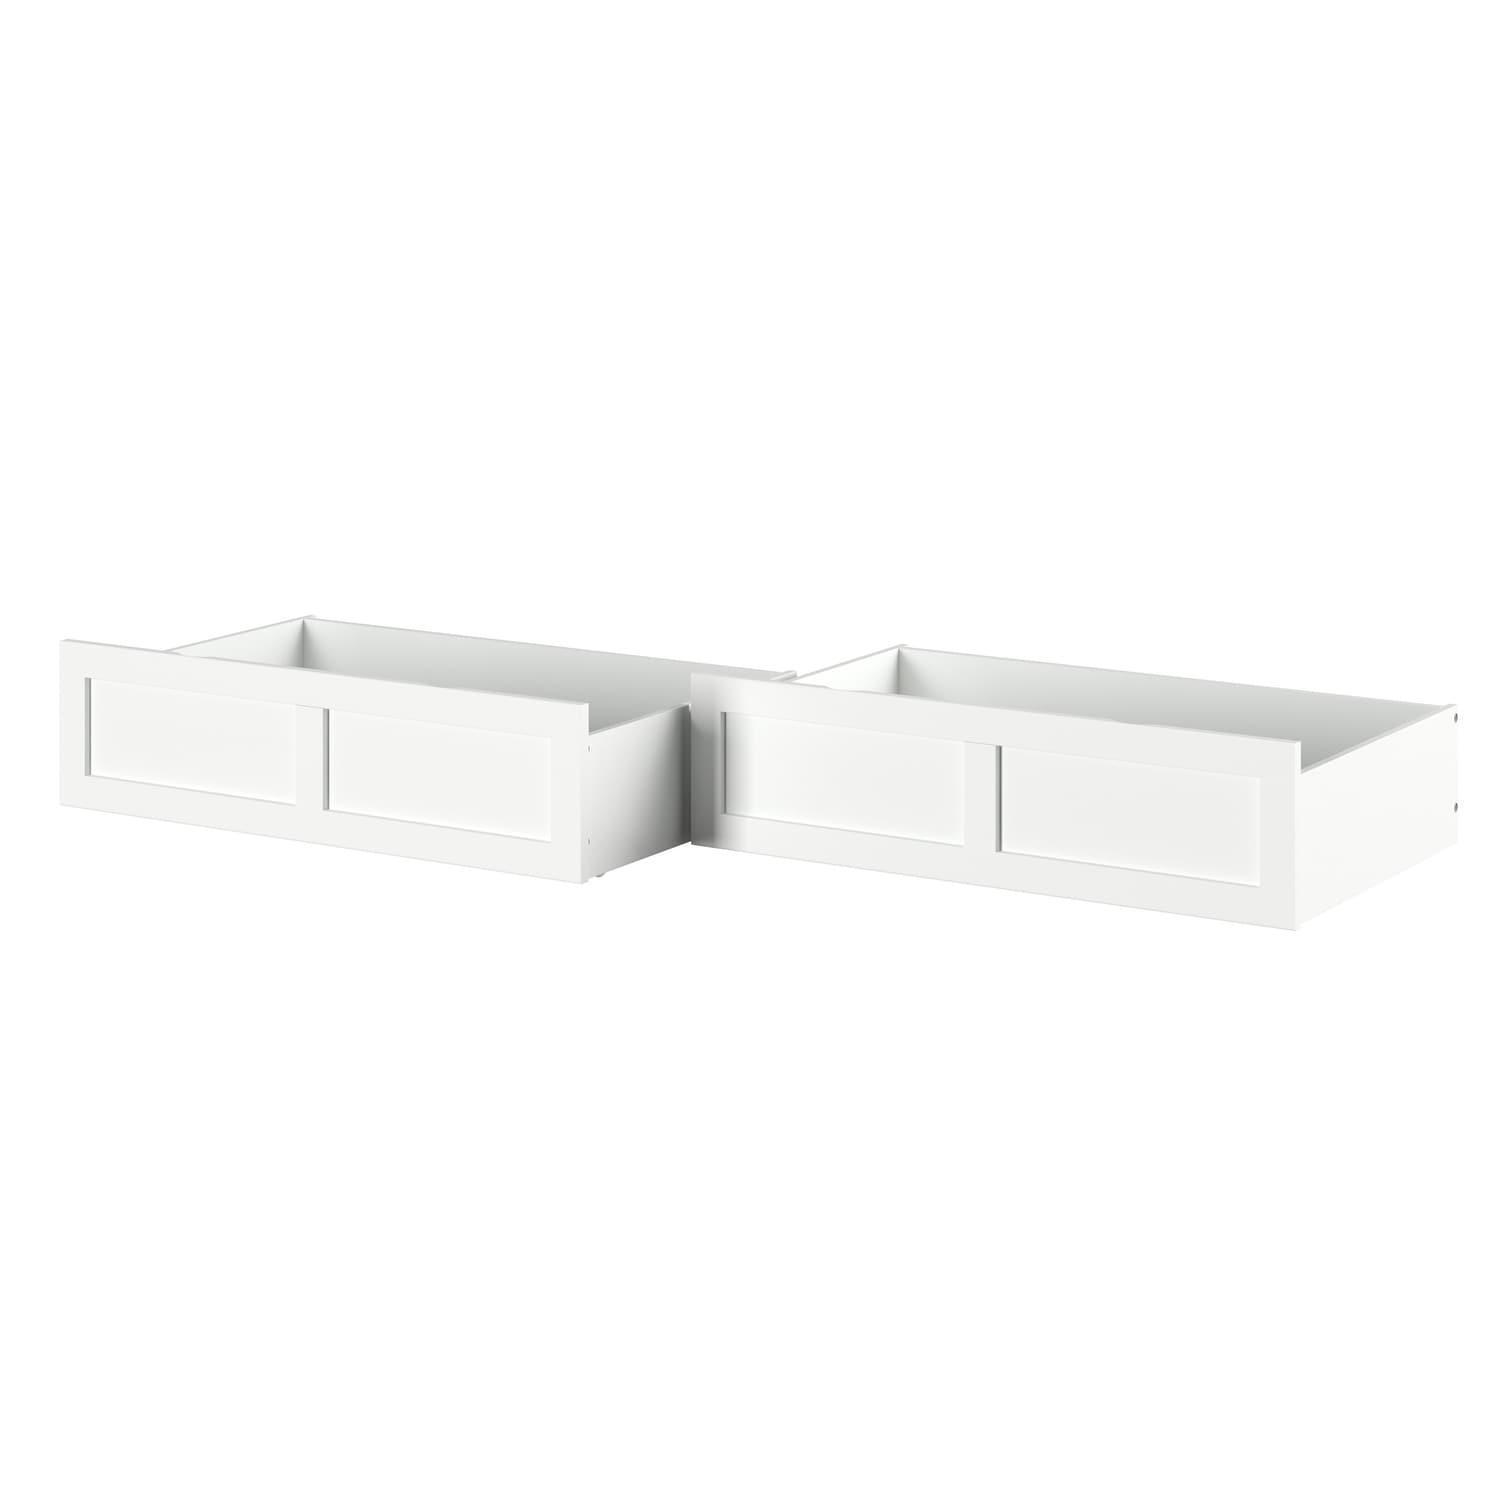 https://ak1.ostkcdn.com/images/products/is/images/direct/18f53e9c3ba22f36ba4c453050b98800a951df61/Bed-Drawer-Set-of-2-Queen-King-Twin-Extra-Long.jpg